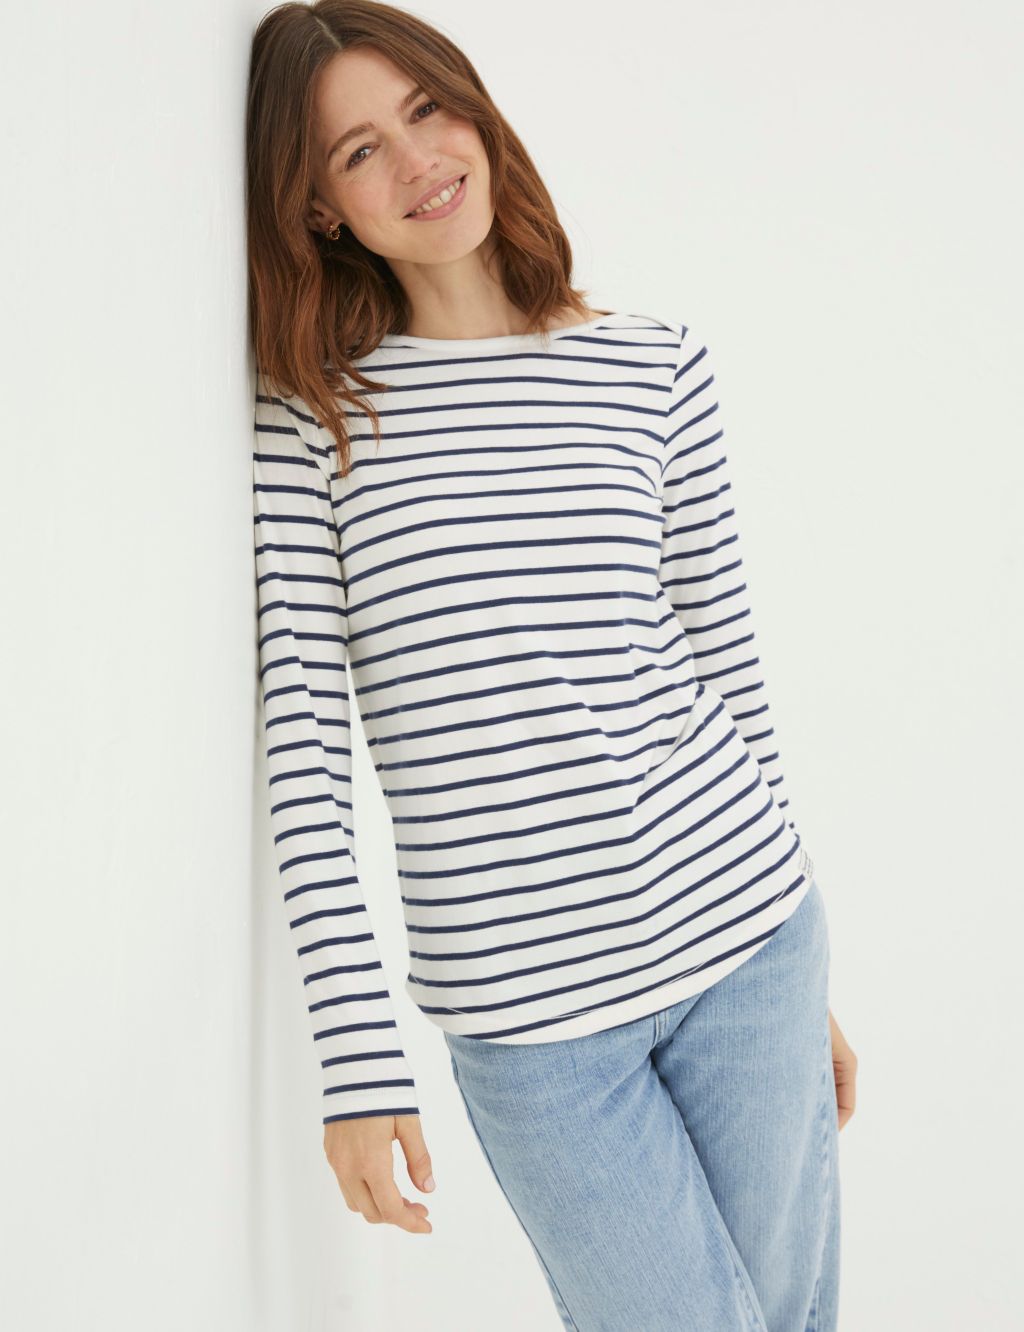 Buy Women’s Cream T-Shirts from the M&S UK Online Shop